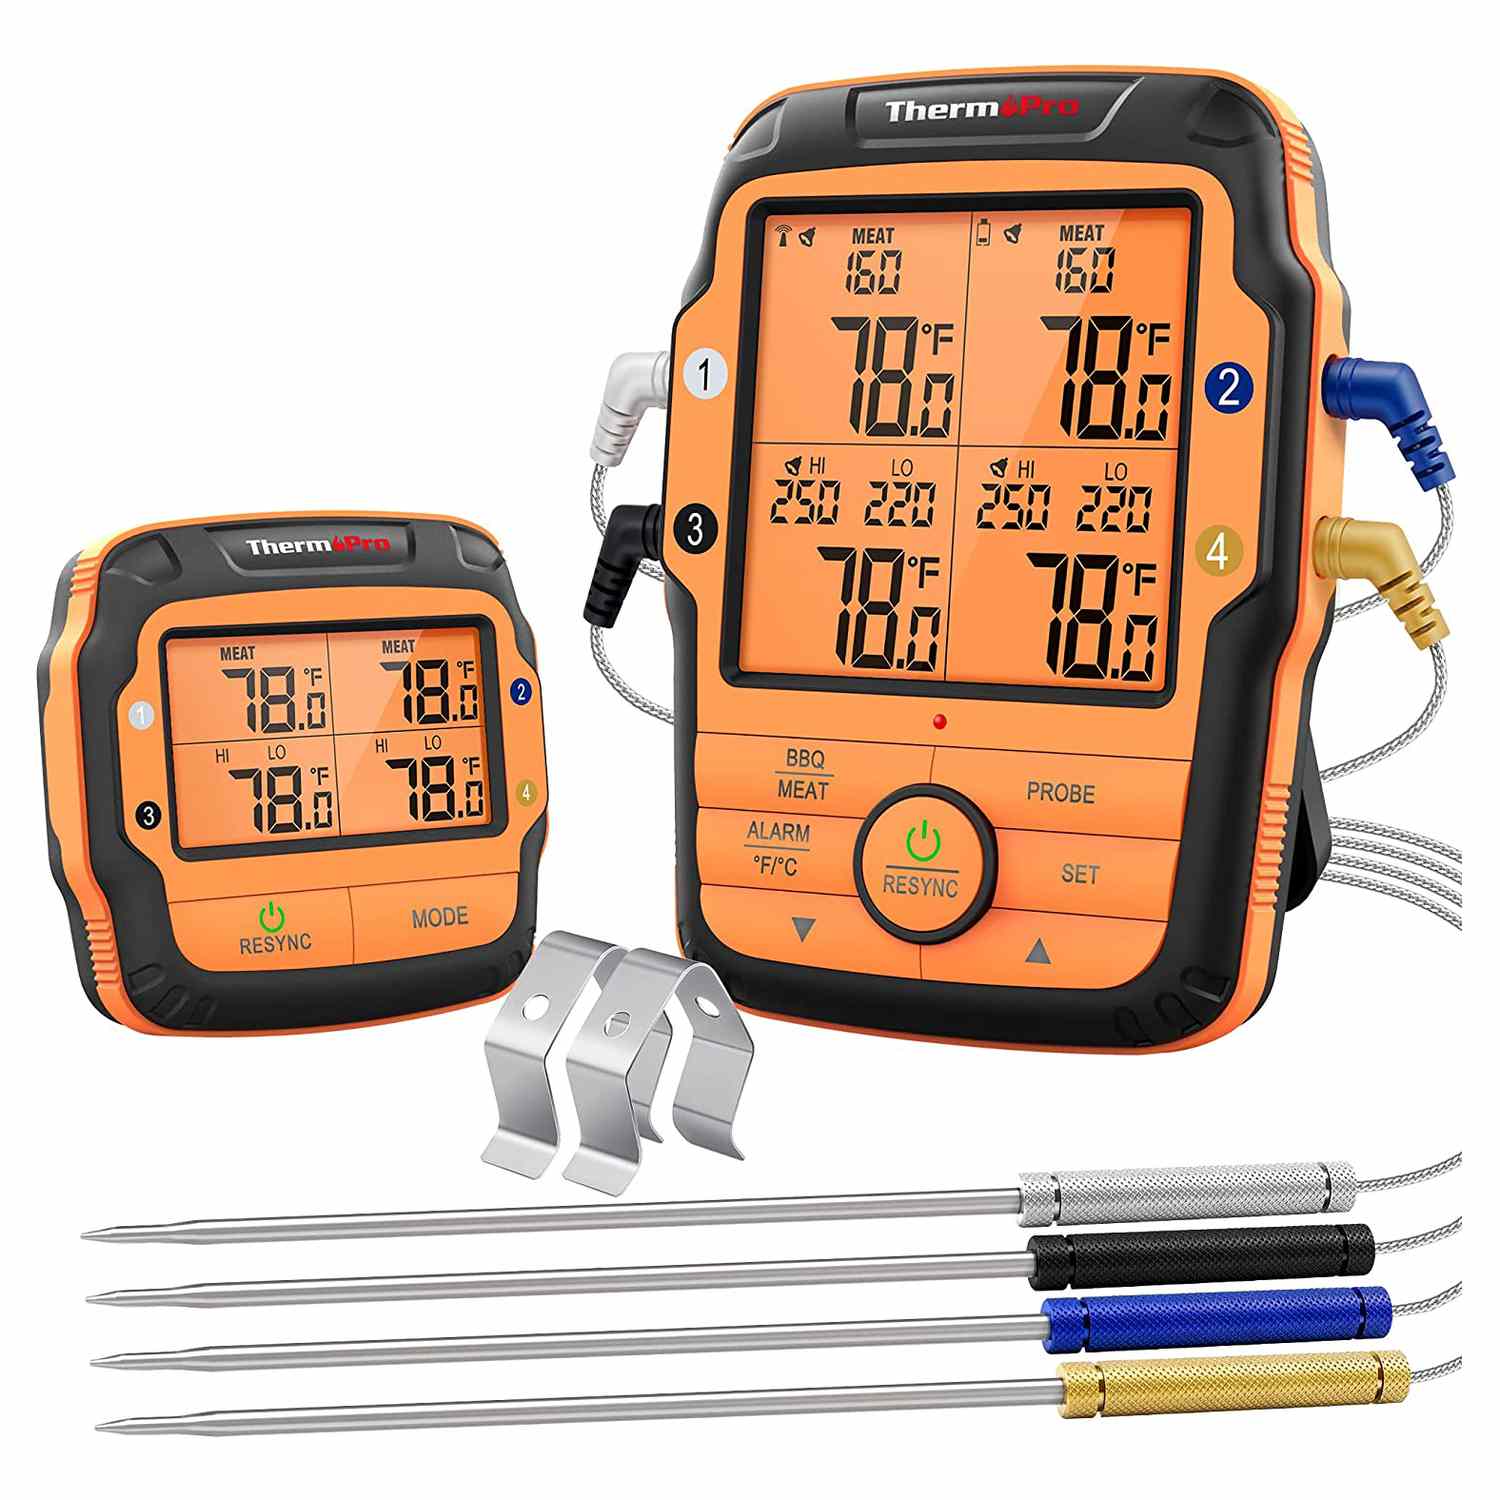 ThermoPro TP27 500FT Long Range Wireless Meat Thermometer for Grilling and Smoking with 4 Probes Smoker BBQ Grill Thermometer Kitchen Food Cooking Thermometer for Meat on a white background